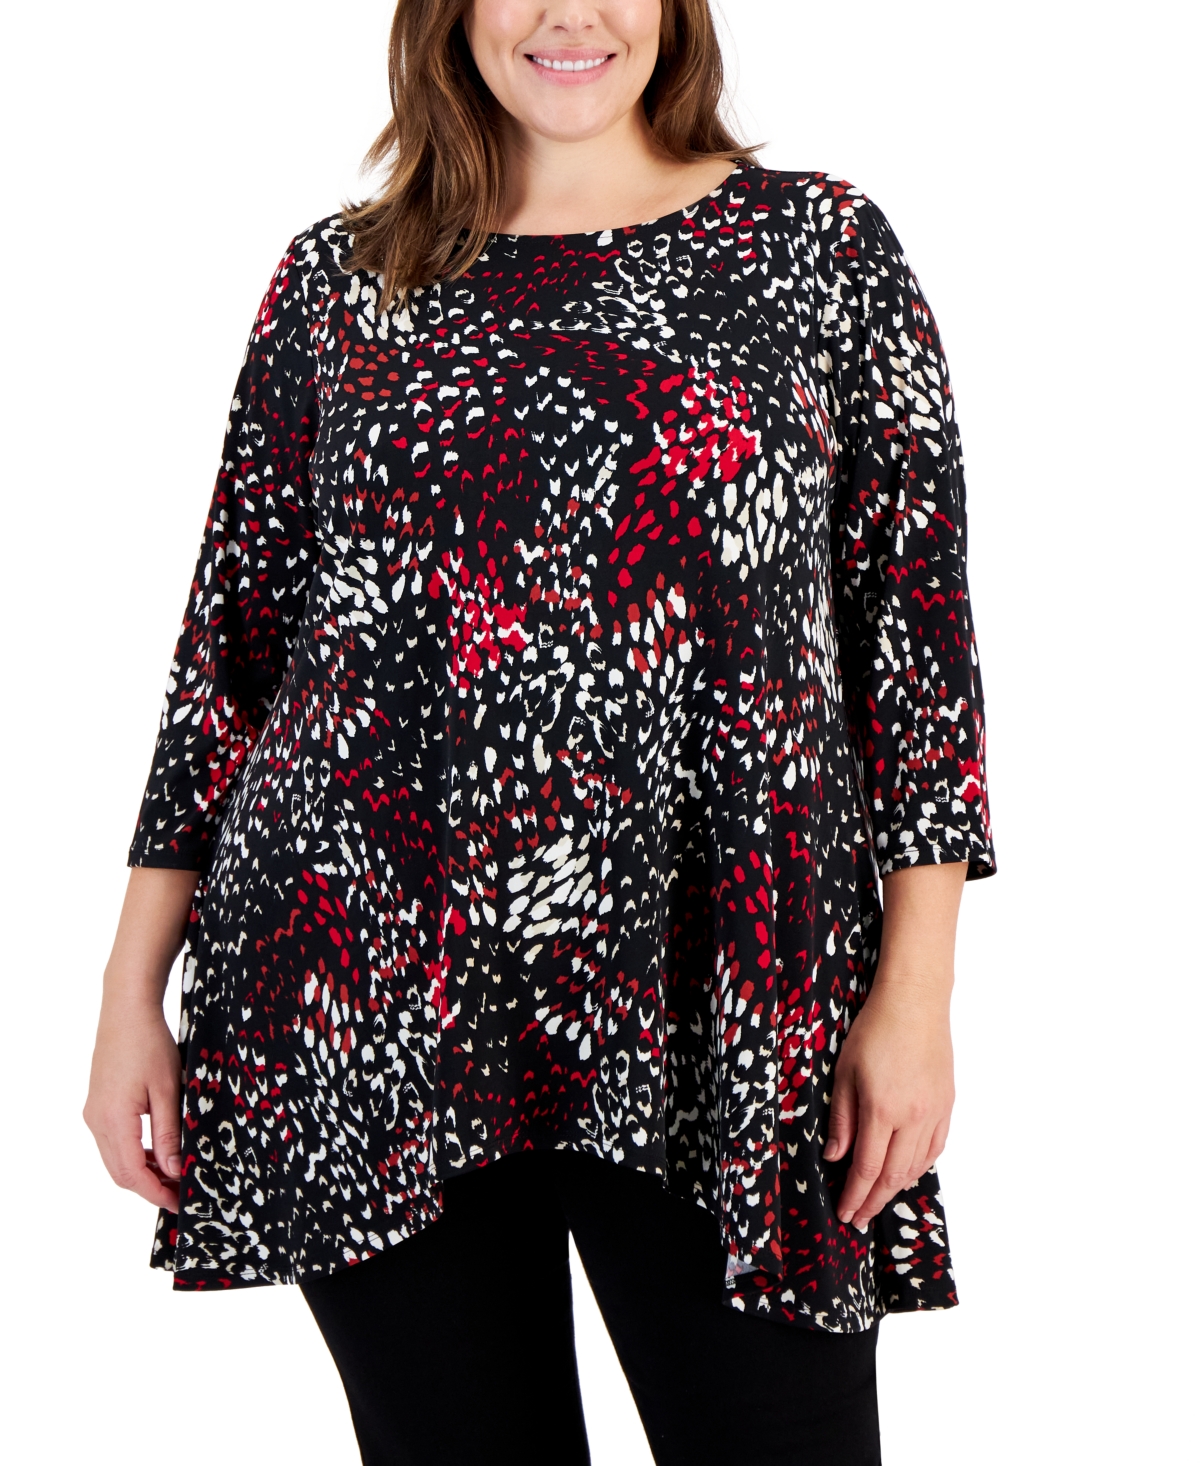 Jm Collection Plus Size Printed Swing Top, Created for Macy's